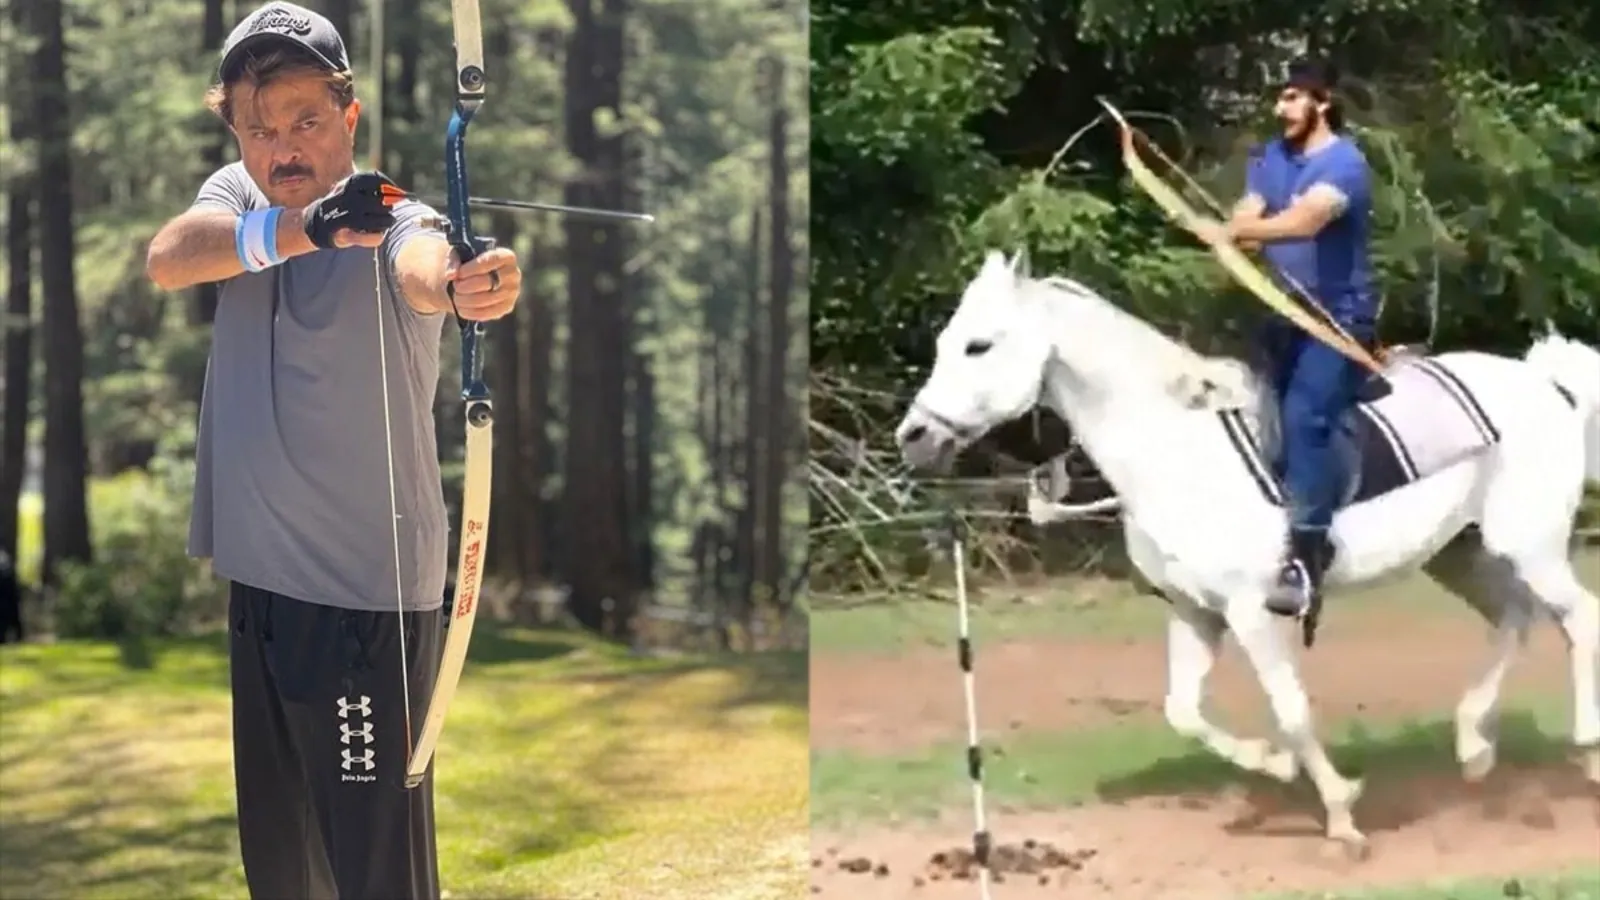 After son Harshvarrdhan Kapoor, Anil Kapoor attempts archery, says he ‘couldn’t get it right’. Watch videos